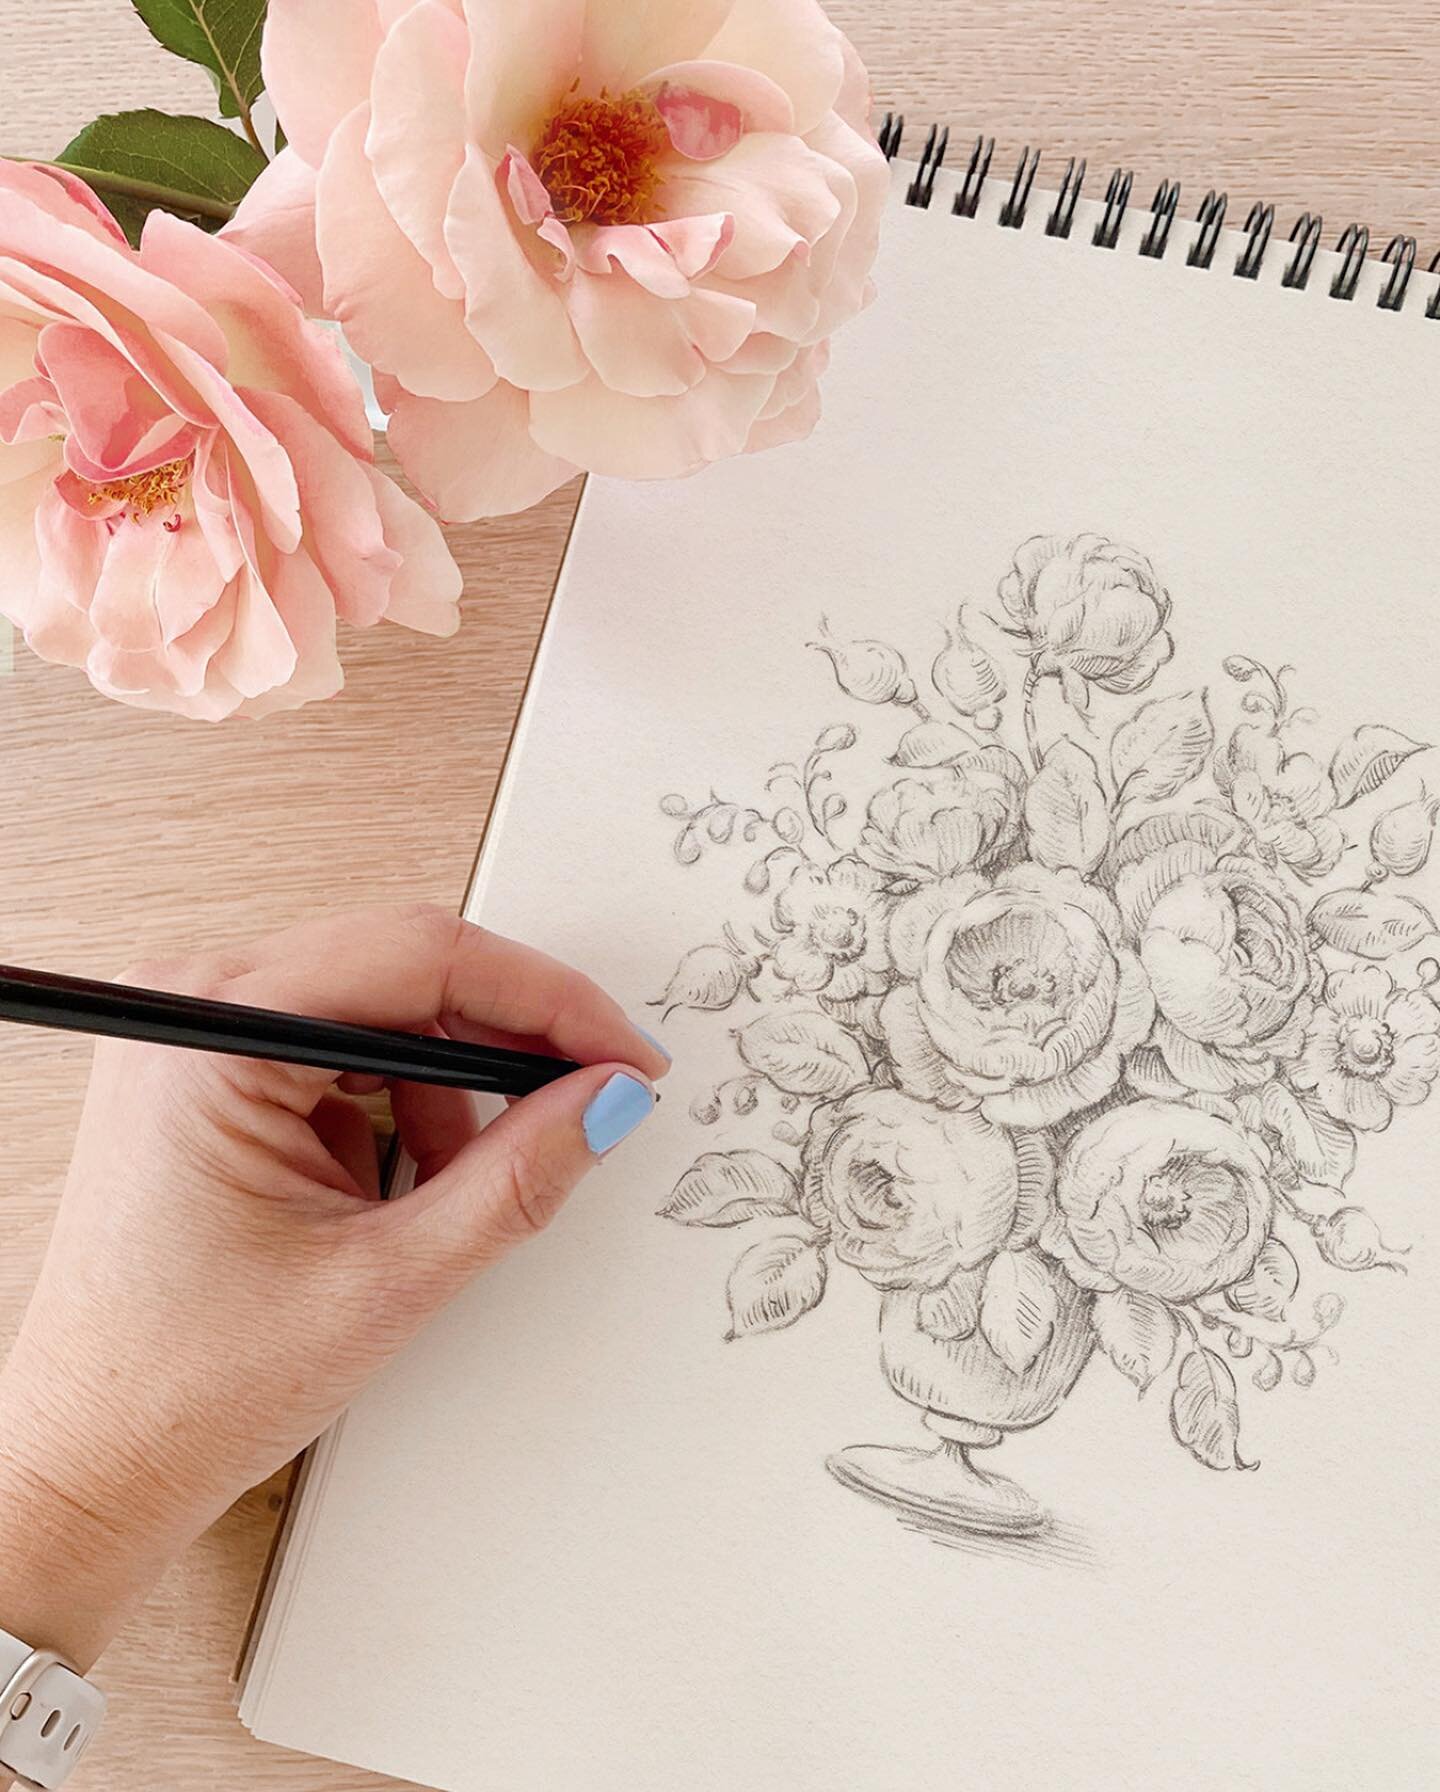 It has been a while since I shared a photo of a design in progress on my feed, but it felt like the time was ripe to do so! Every single design I ever work on starts out as a rough pencil sketch, just like this one here. This photo was taken when thi